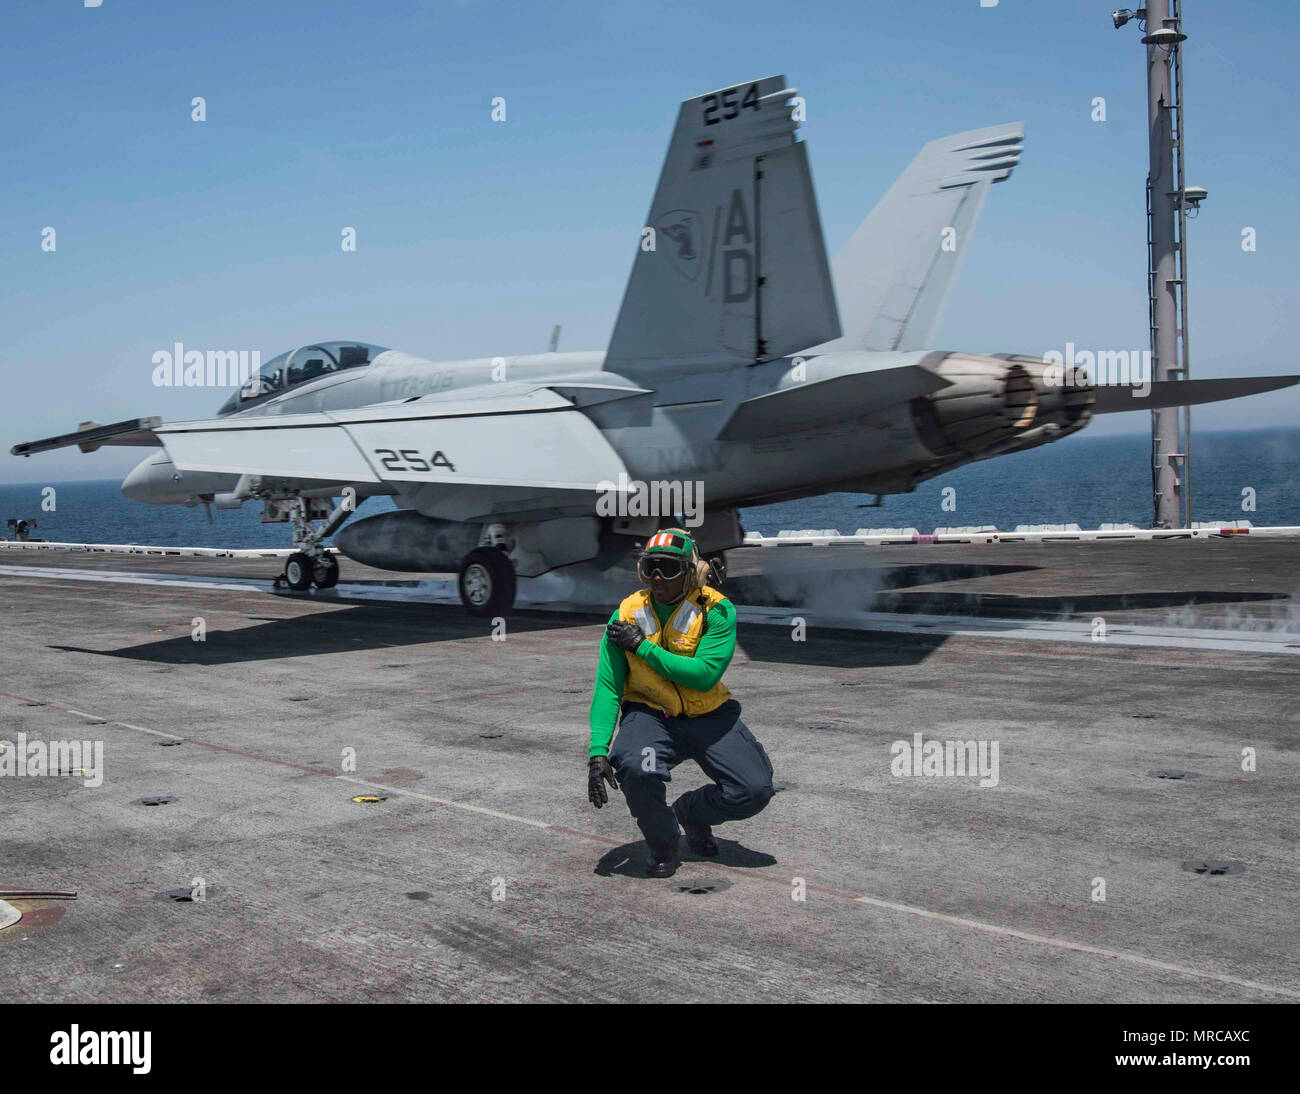 170601-N-KJ380-314  ATLANTIC OCEAN (June 1, 2017) Aviation Boatswain's Mate (Equipment) 2nd Class Ladarrius Robinson signals an F/A-18E Super Hornet assigned to the Gladiators of Strike Fighter Squadron (VFA) 106 for launch on the flight deck of the aircraft carrier USS Dwight D. Eisenhower (CVN 69) (Ike). Ike is currently conducting aircraft carrier qualifications during the sustainment phase of the Optimized Fleet Response Plan (OFRP). (U.S. Navy photo by Mass Communication Specialist Seaman Neo B. Greene III) Stock Photo